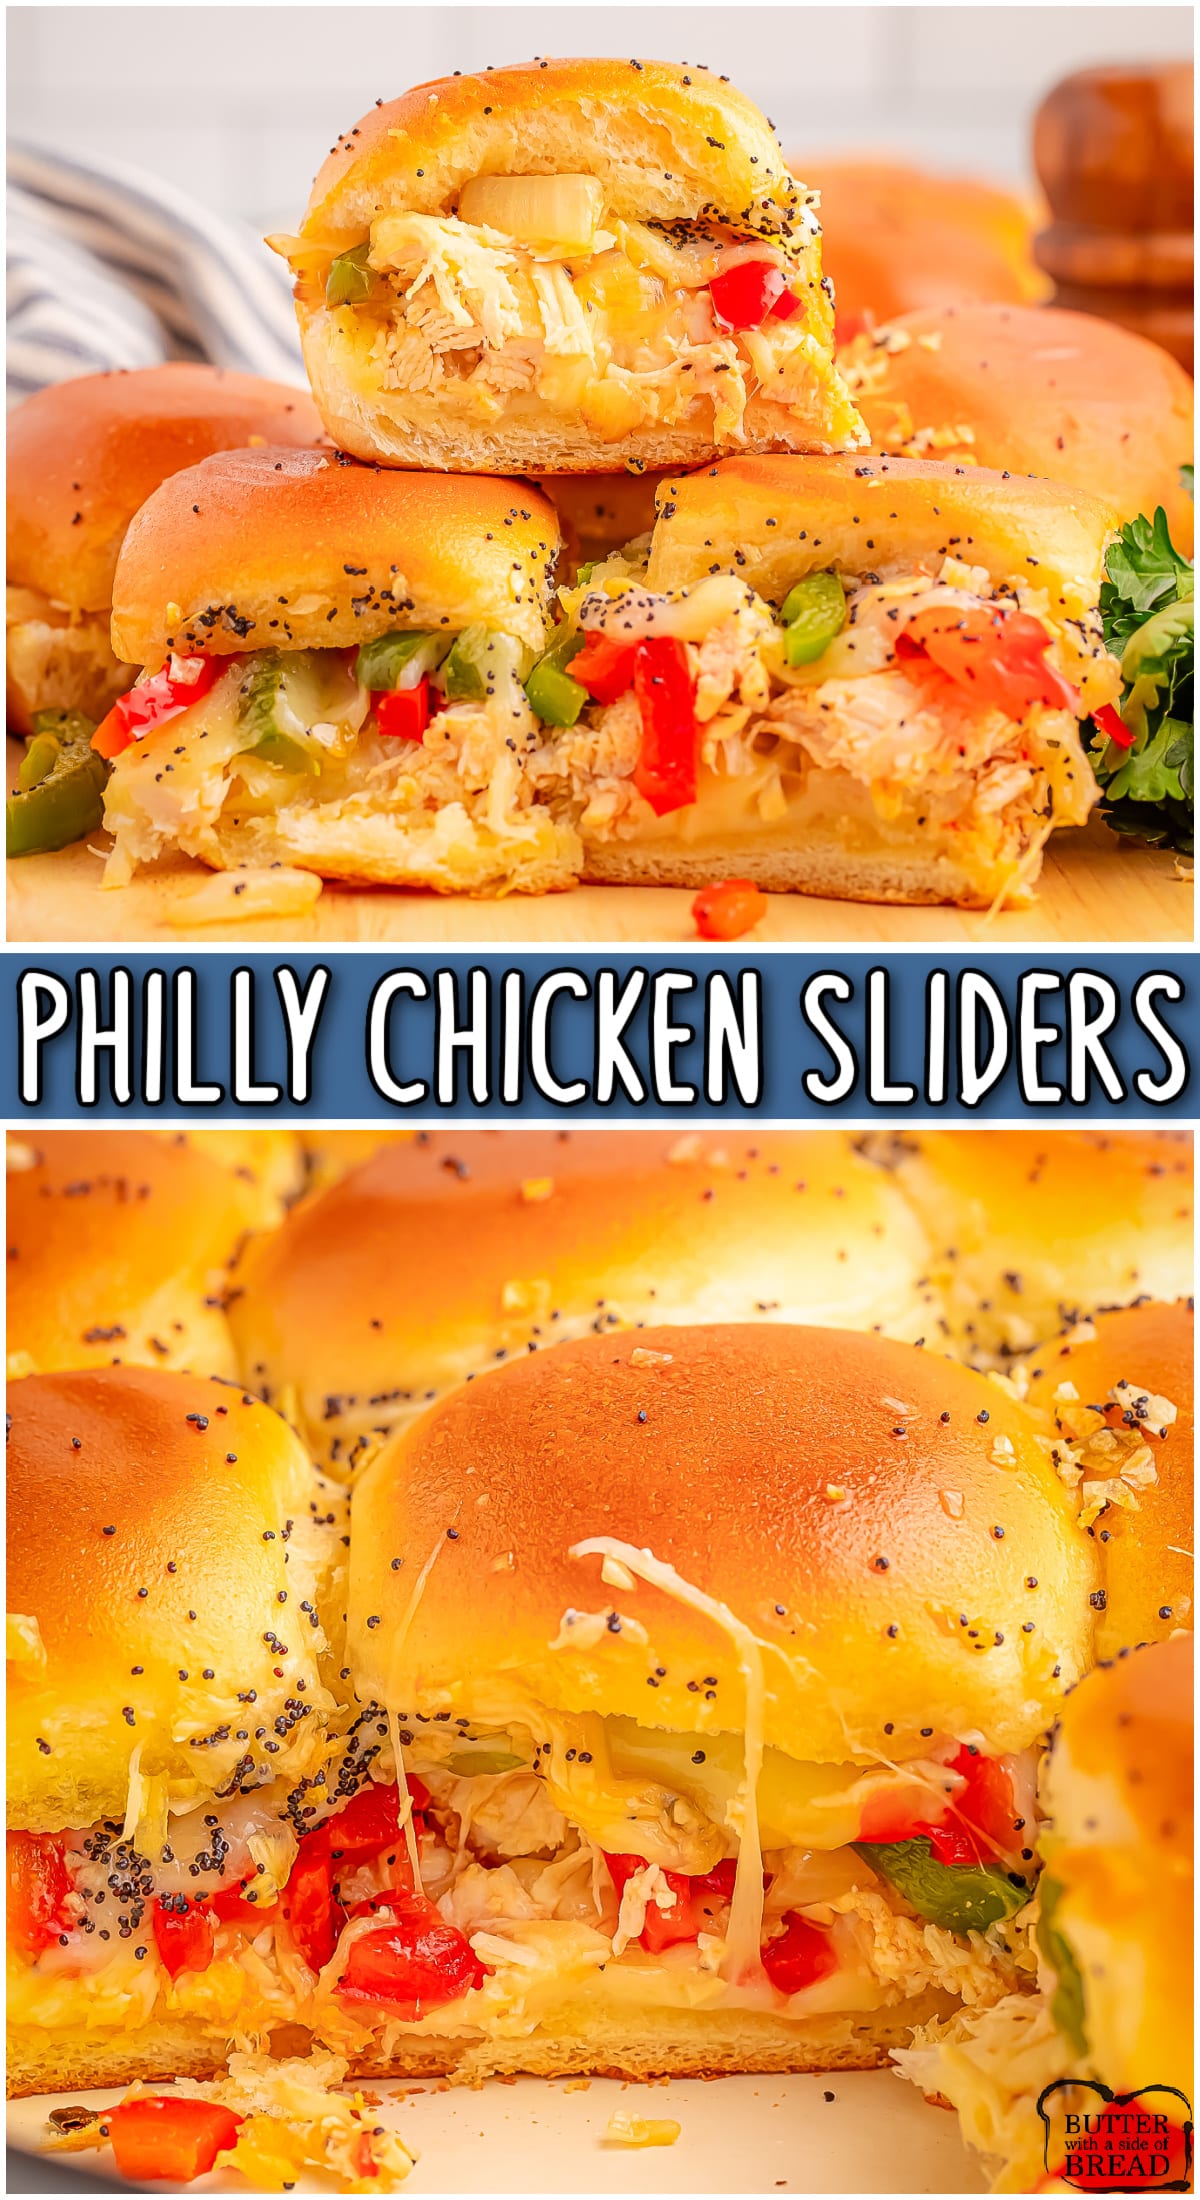 Philly Chicken Sliders made with shredded chicken, sautéed bell peppers, onions, and provolone cheese for a simple weeknight meal full of flavor!